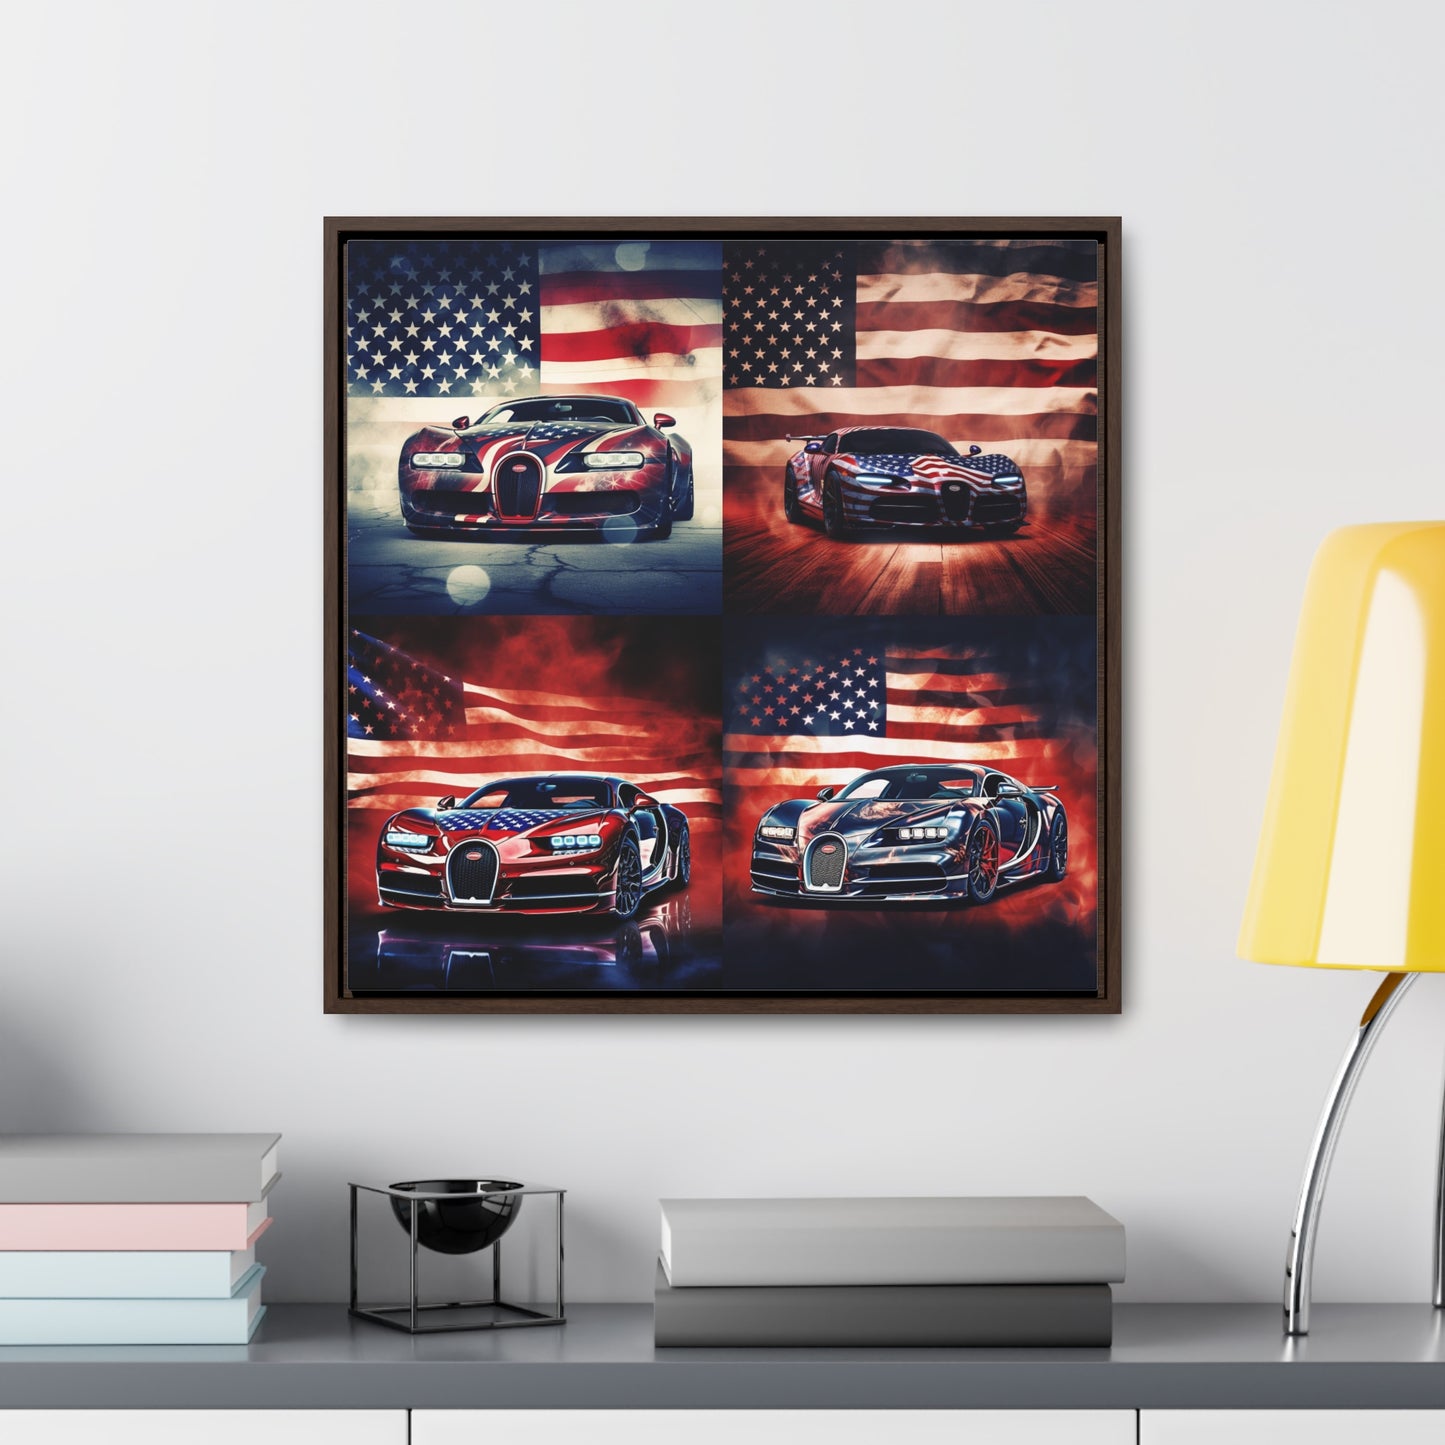 Gallery Canvas Wraps, Square Frame Abstract American Flag Background Bugatti 5